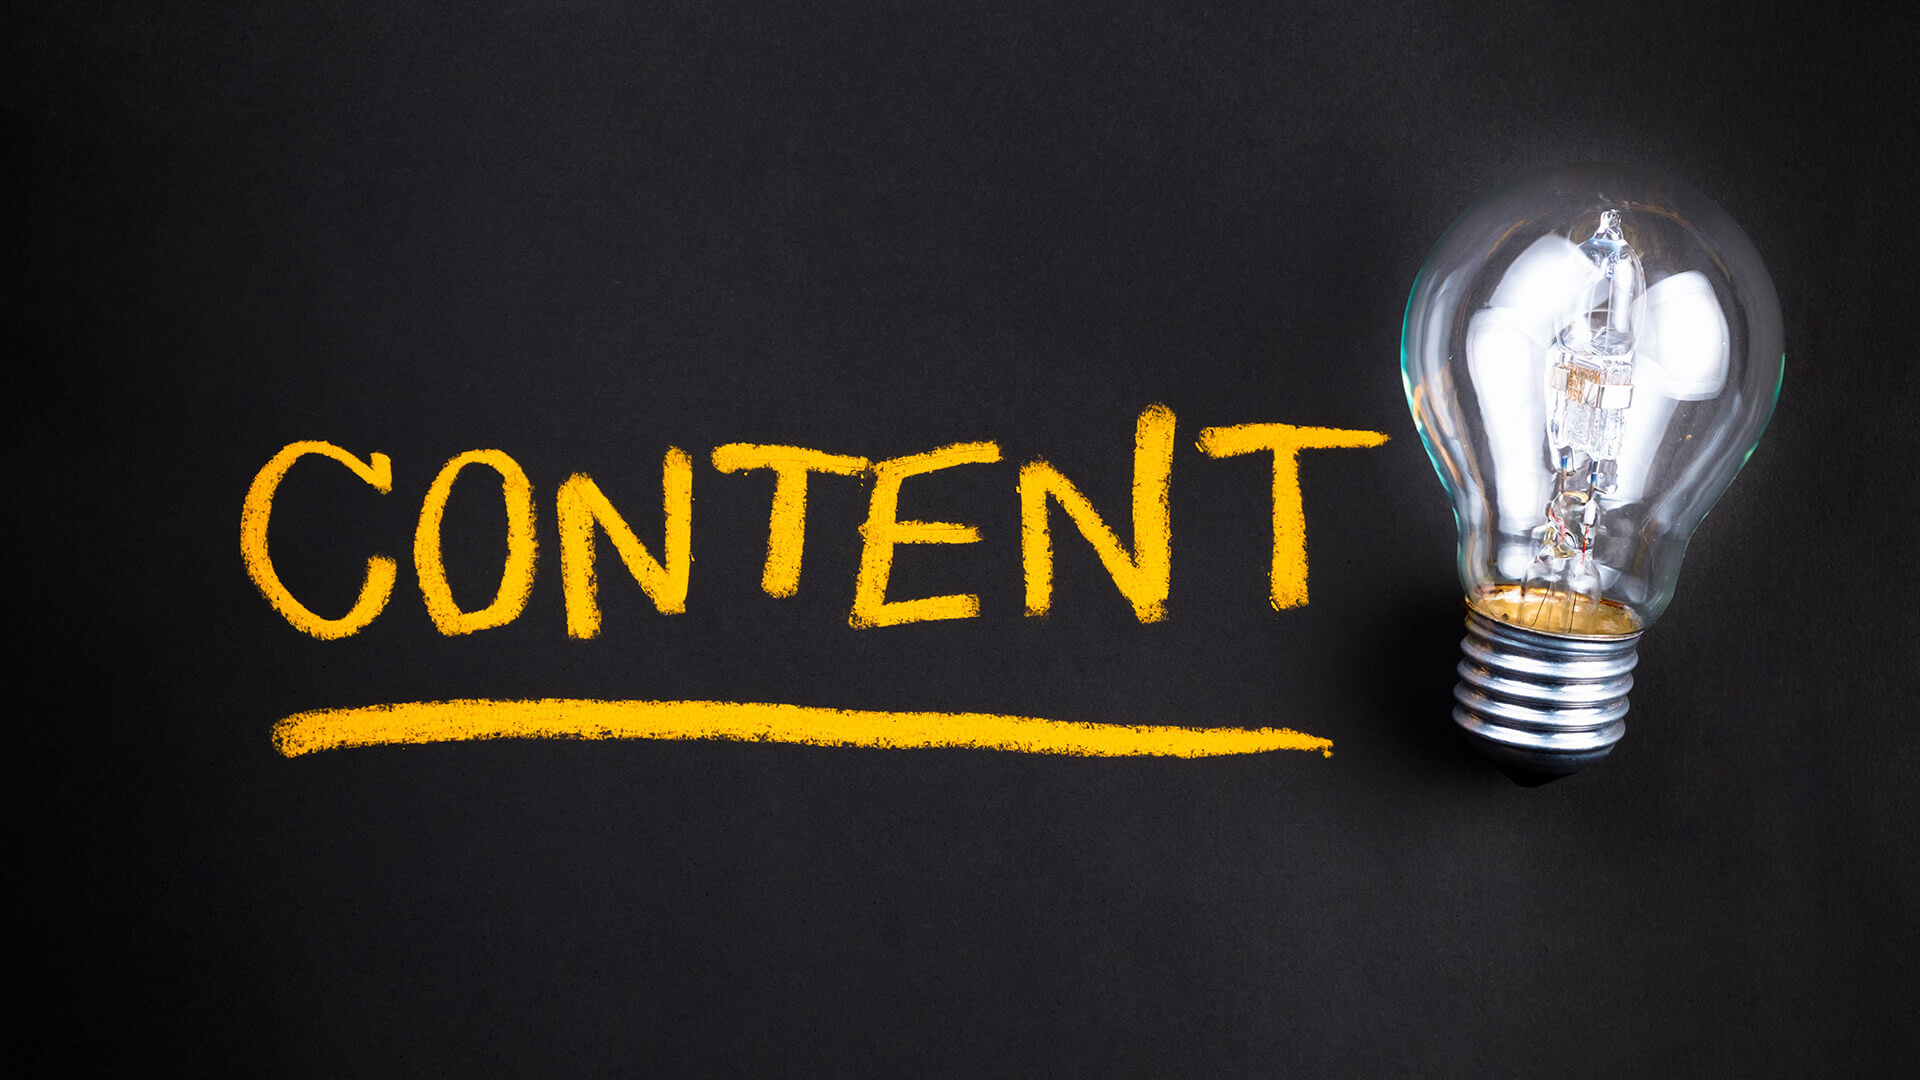 The word "Content" is underlined next to a light bulb